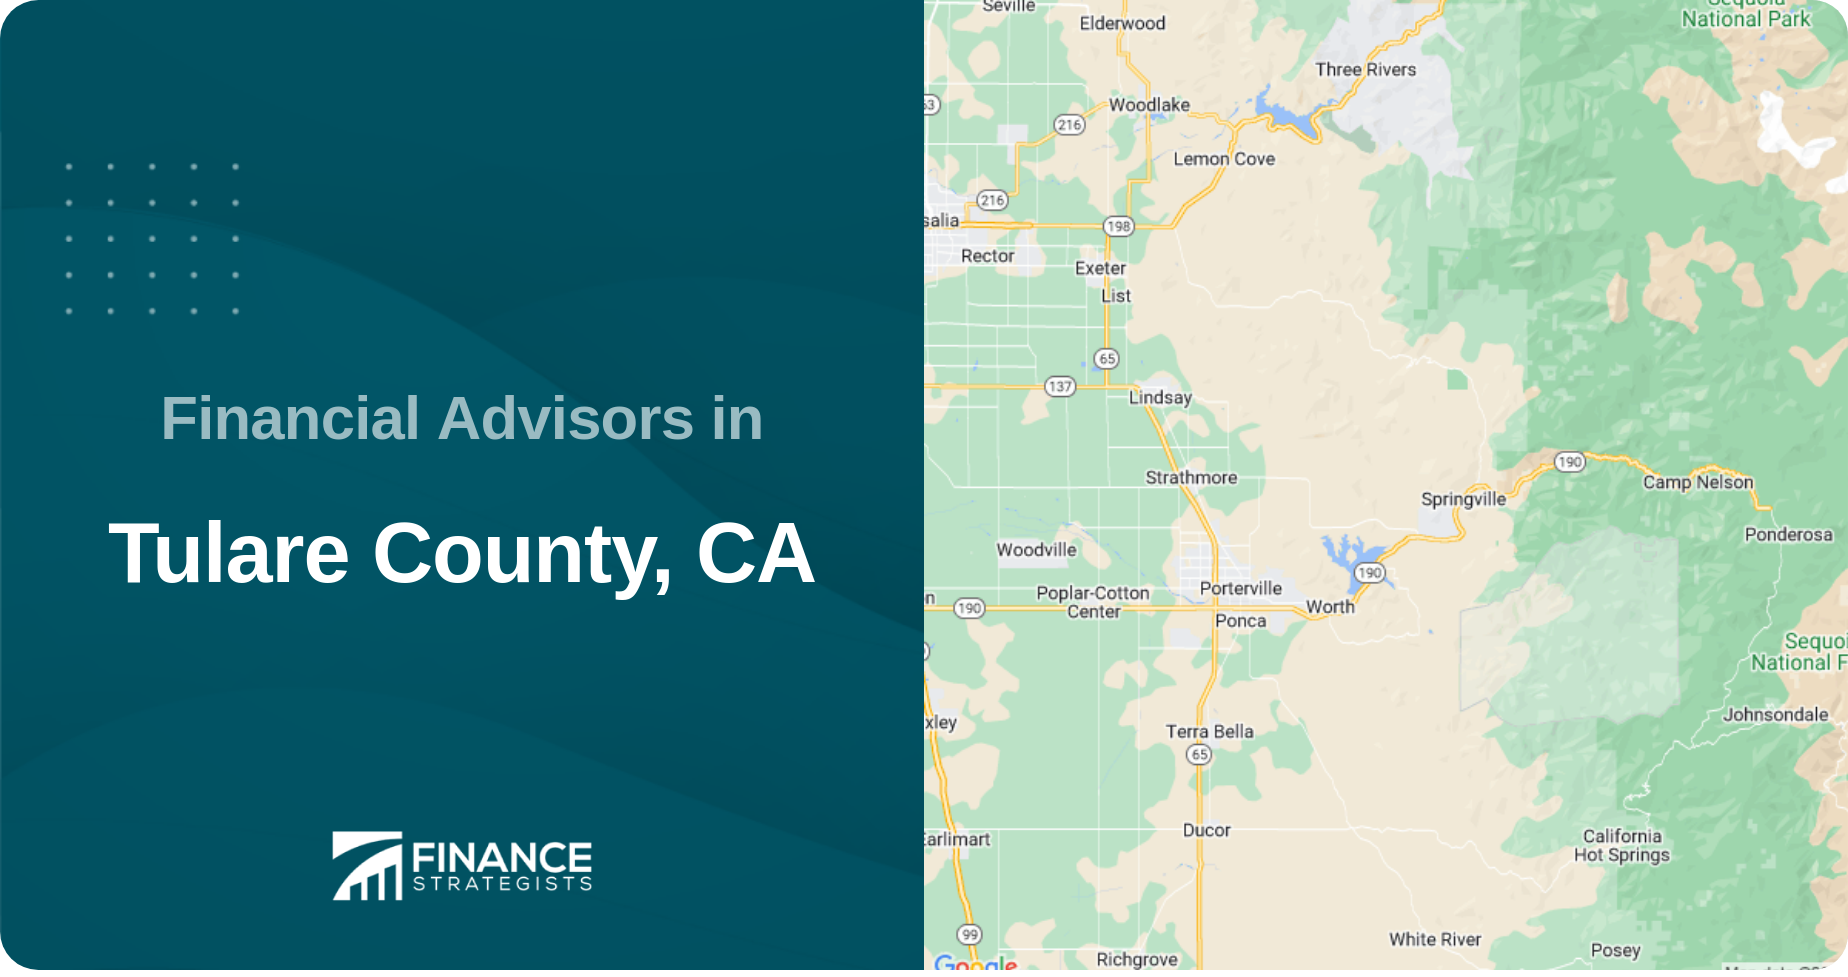 Financial Advisors in Tulare County, CA